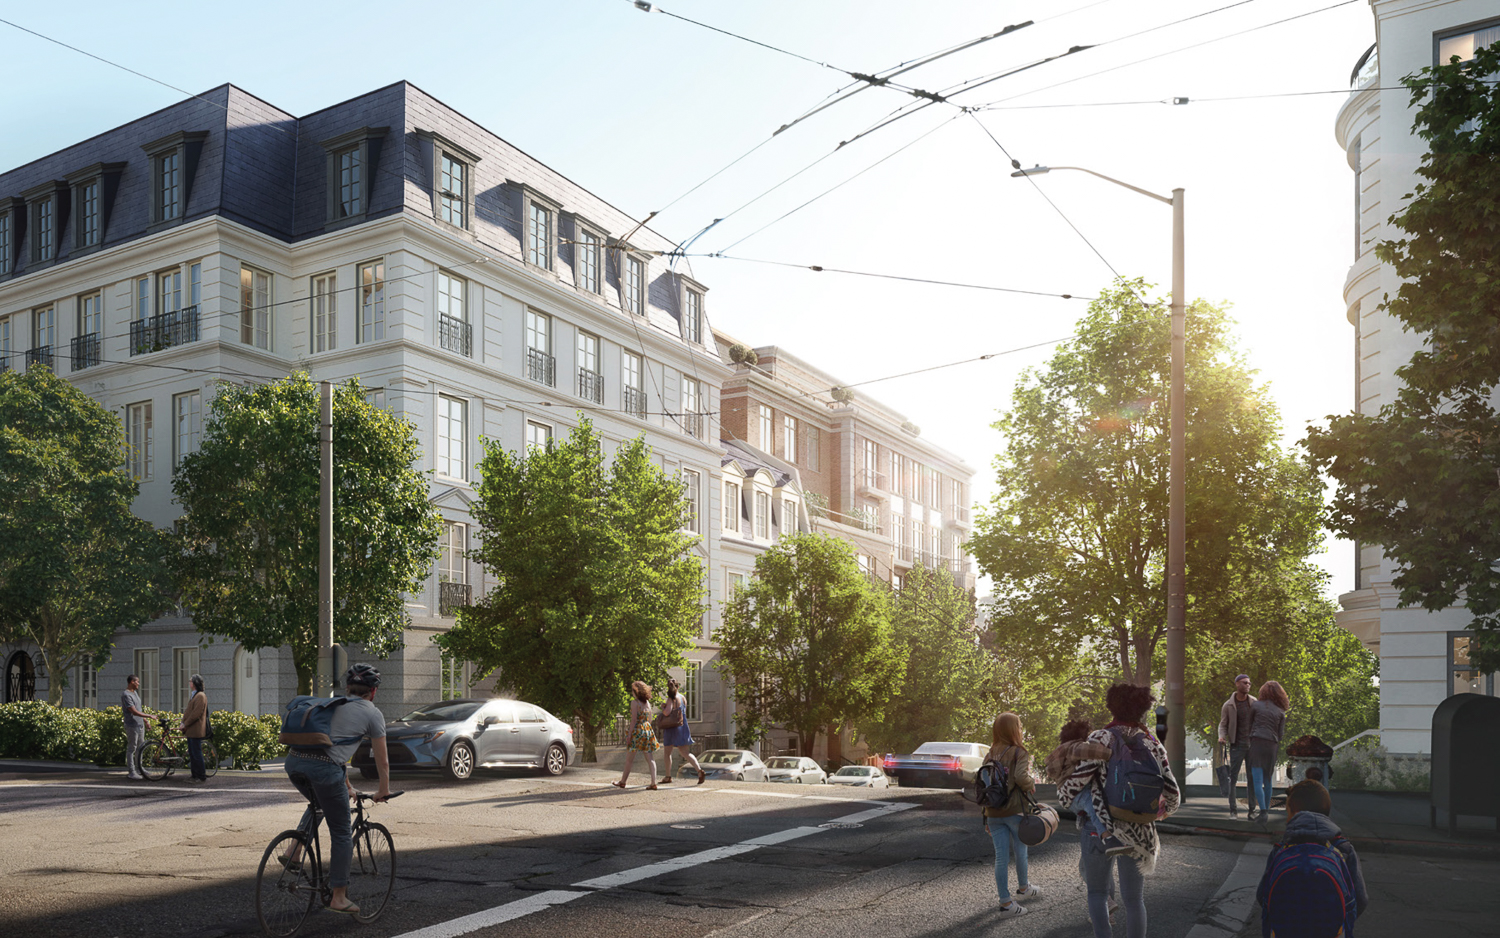 3700 California Street at the intersection of Sacramento Street and Maple Street, rendering by Robert AM Stern Architects